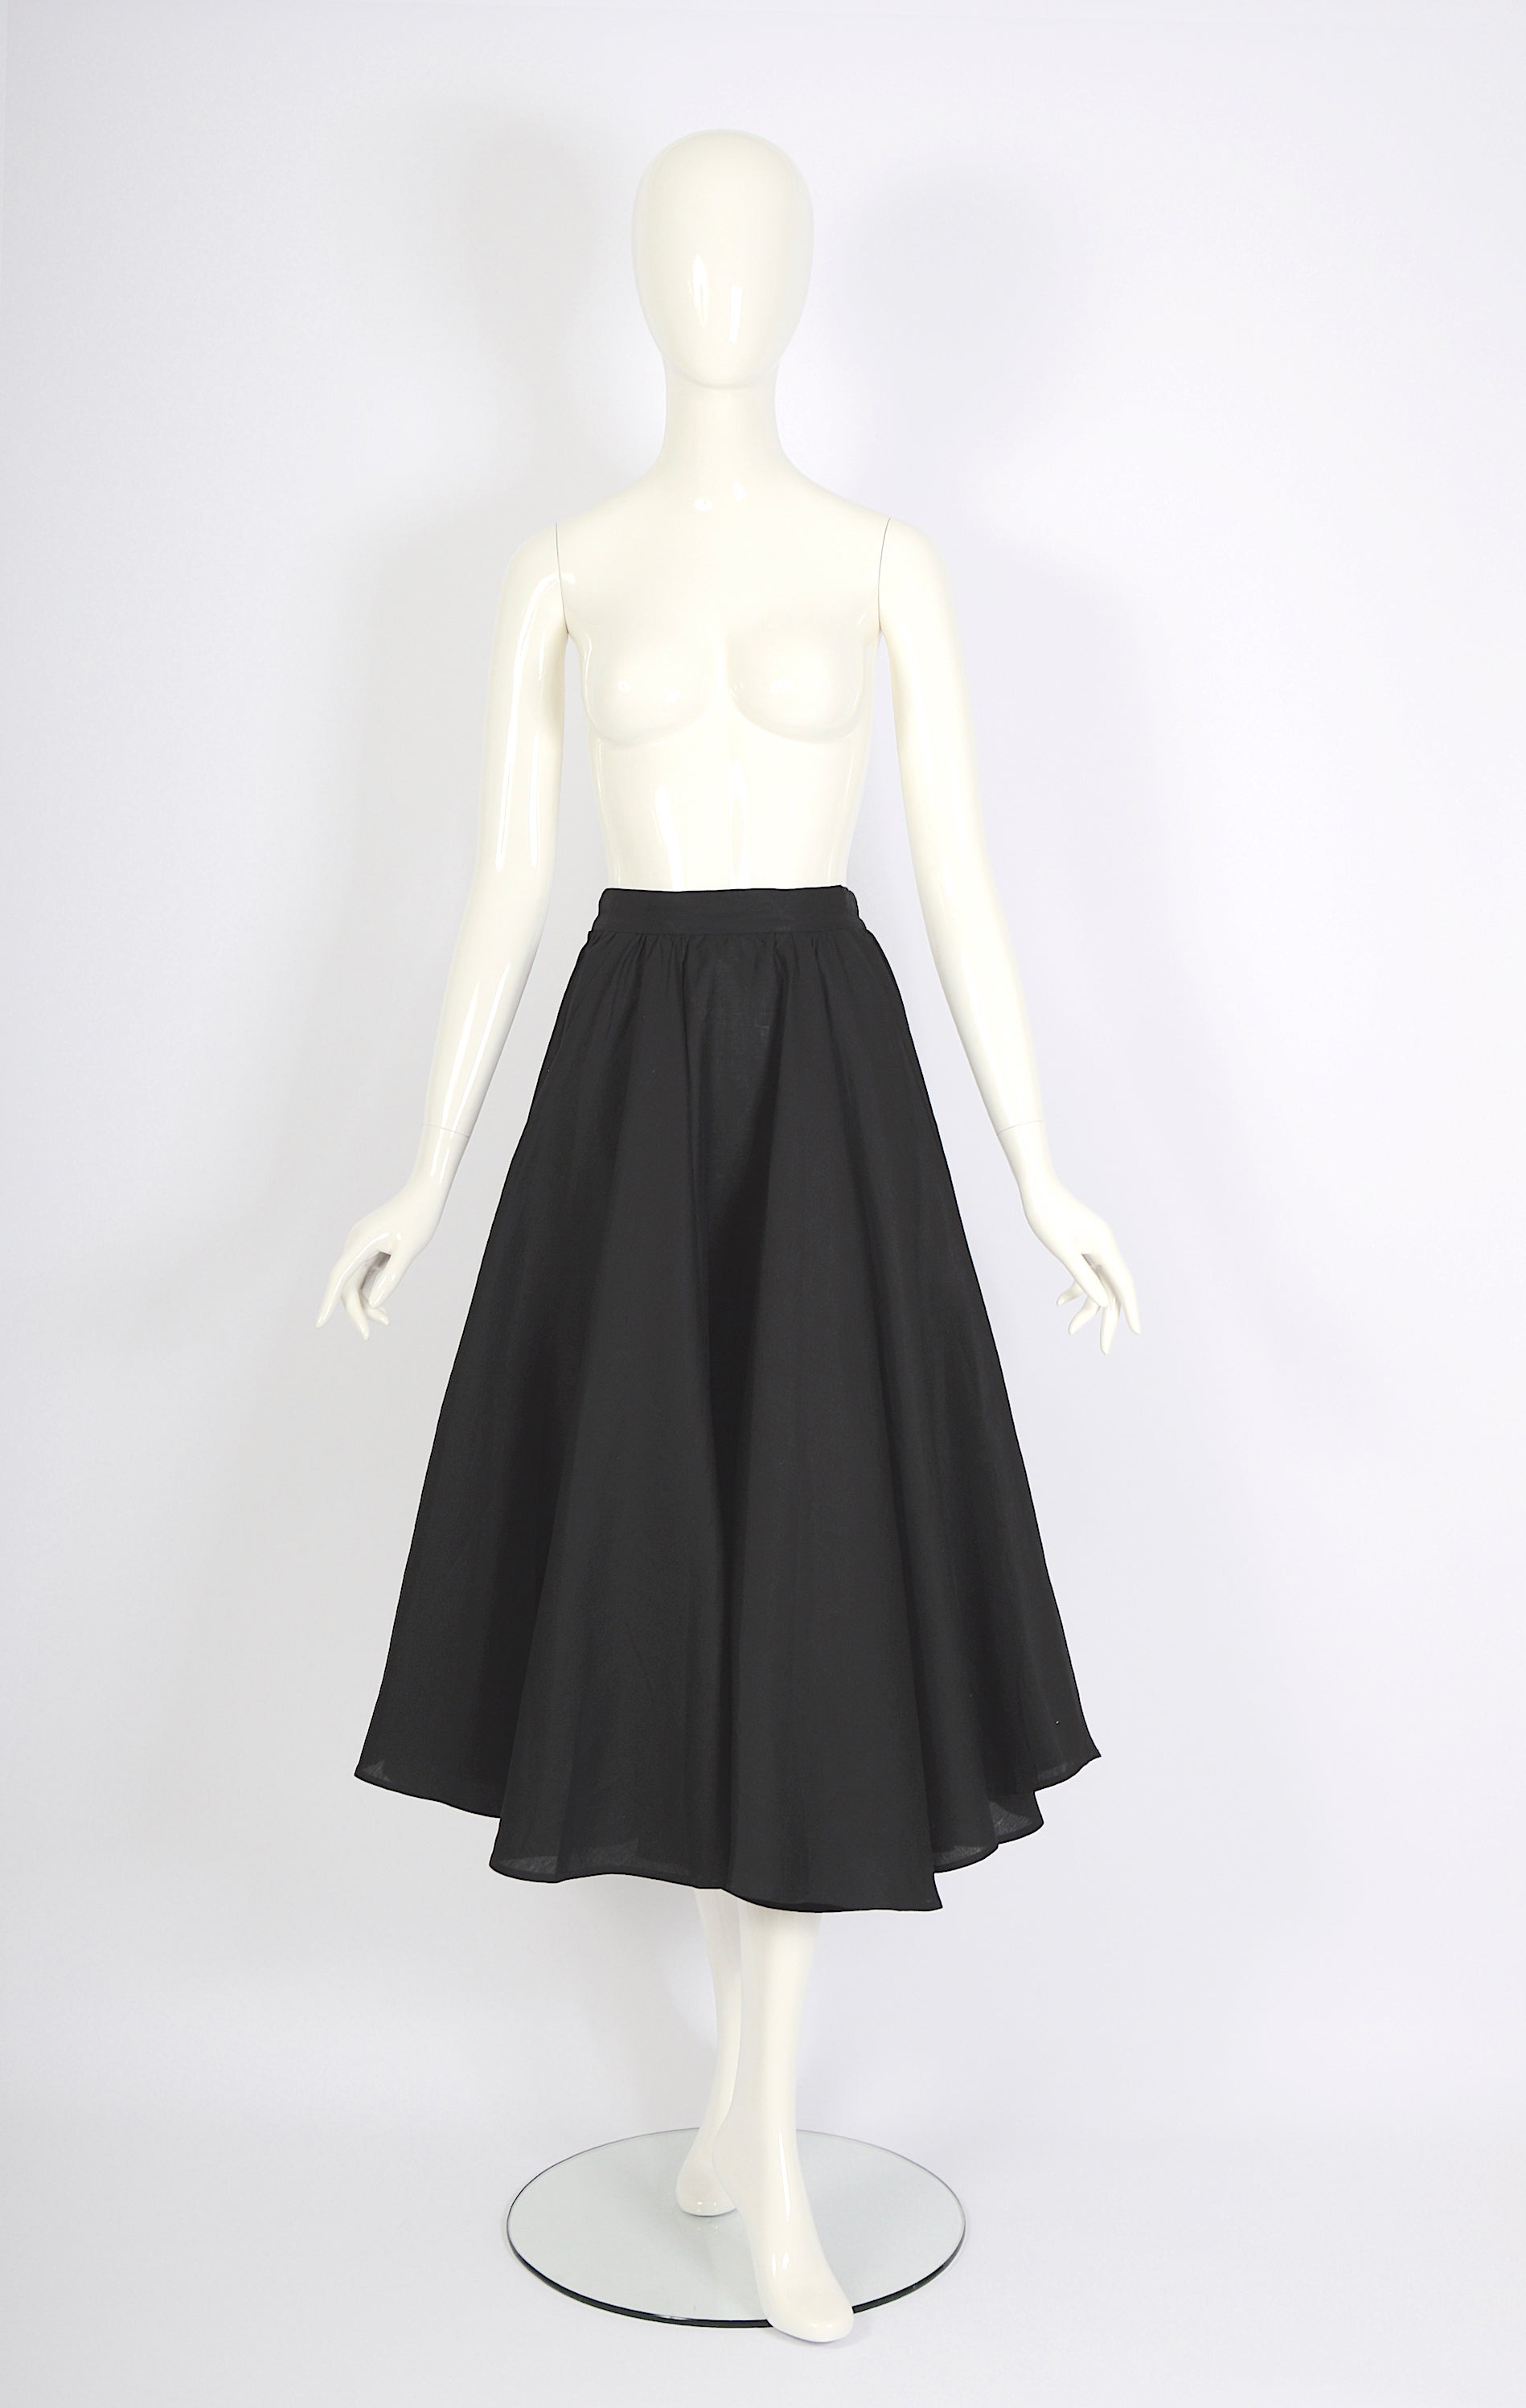 Stunning vintage by Thierry Mugler black linen full circle swing skirt.
Front slide pockets.
Beautiful excellent condition.
French size 38
Measurements flat:
Waist:  12,5inch/32cm(x2)
Hip: free 
Total length: 34inch/97cm